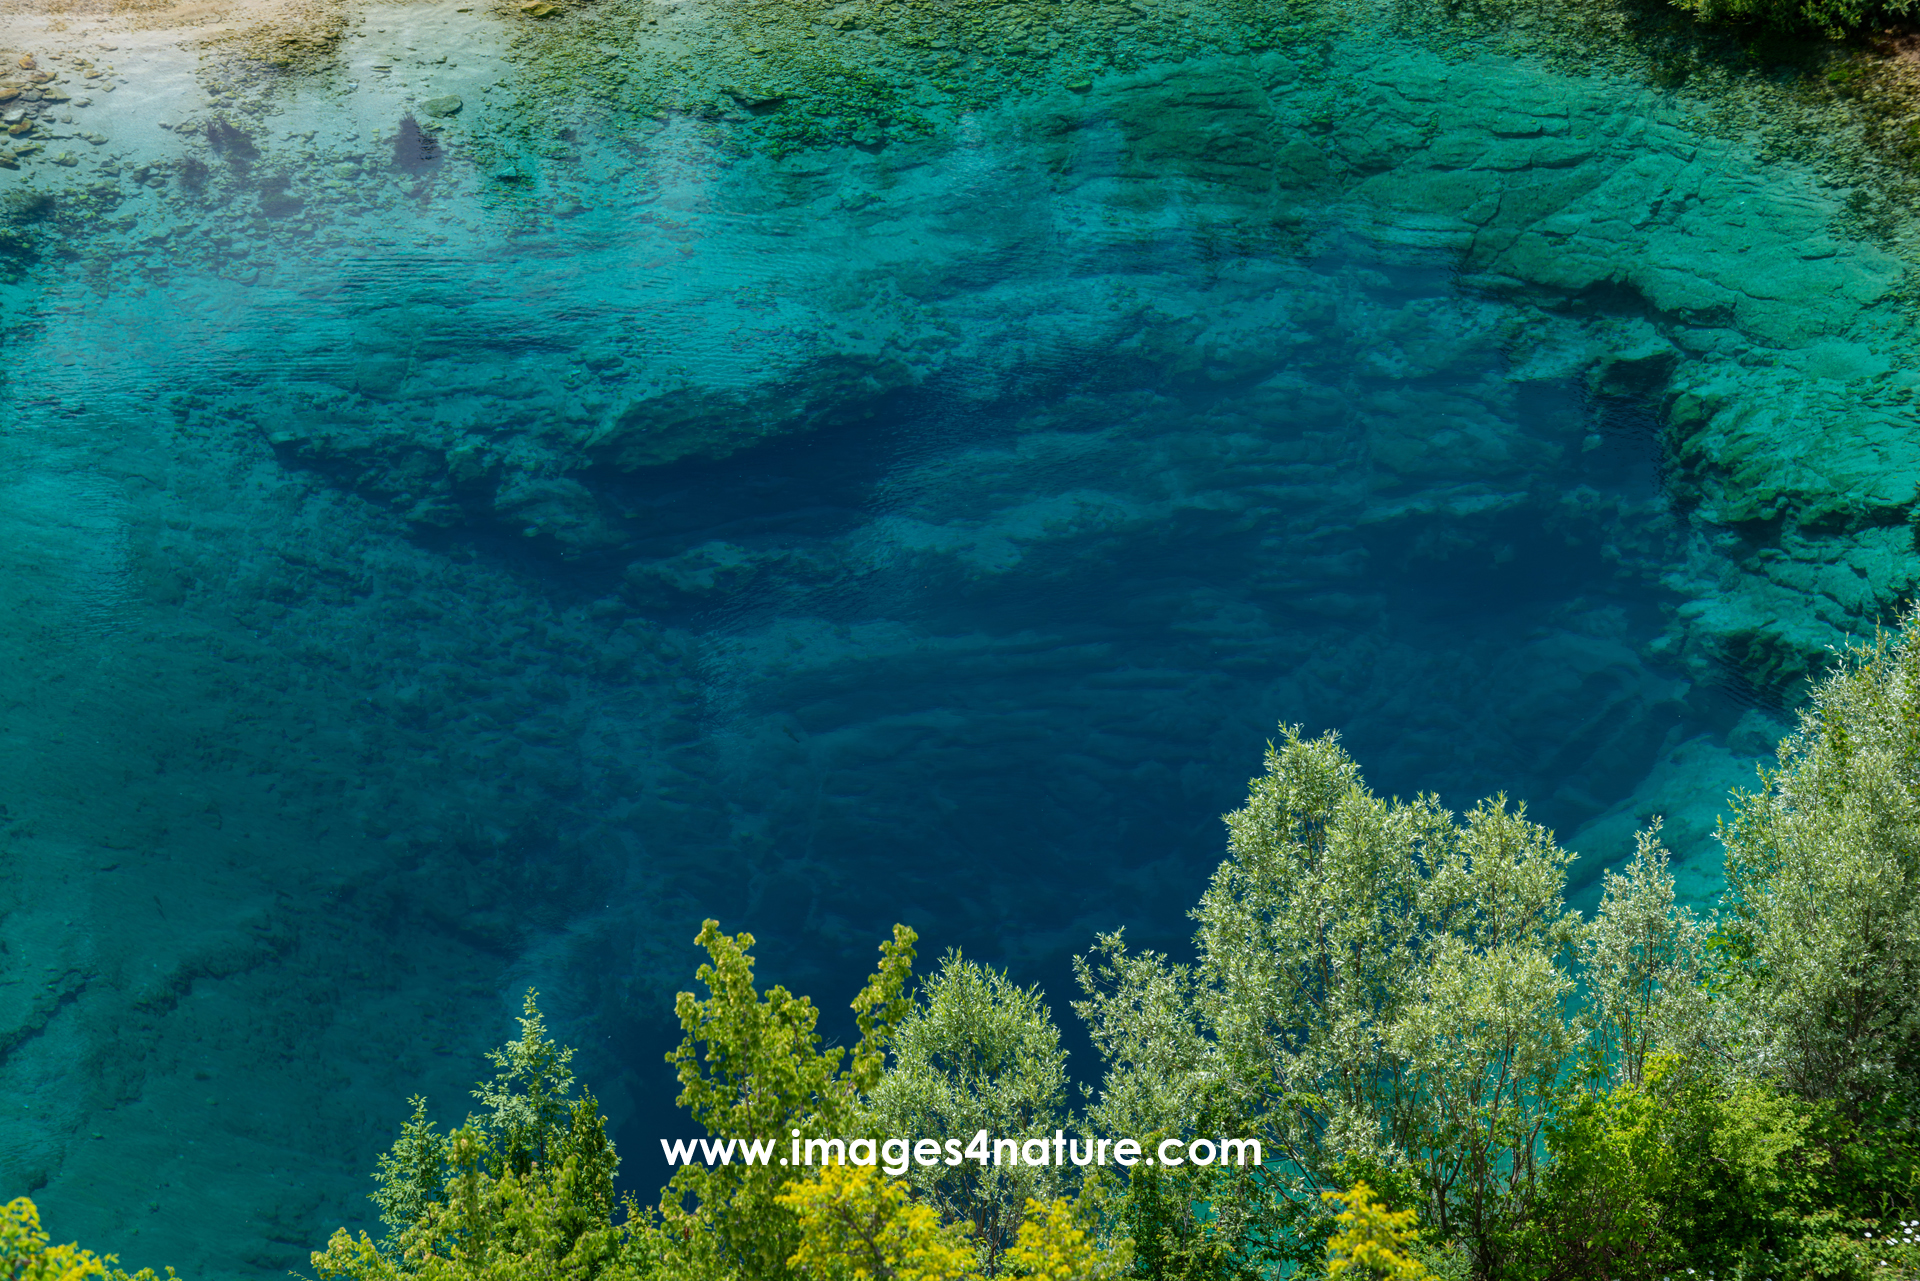 Vertical rock wall at Cetina river source dropping into deep blue water